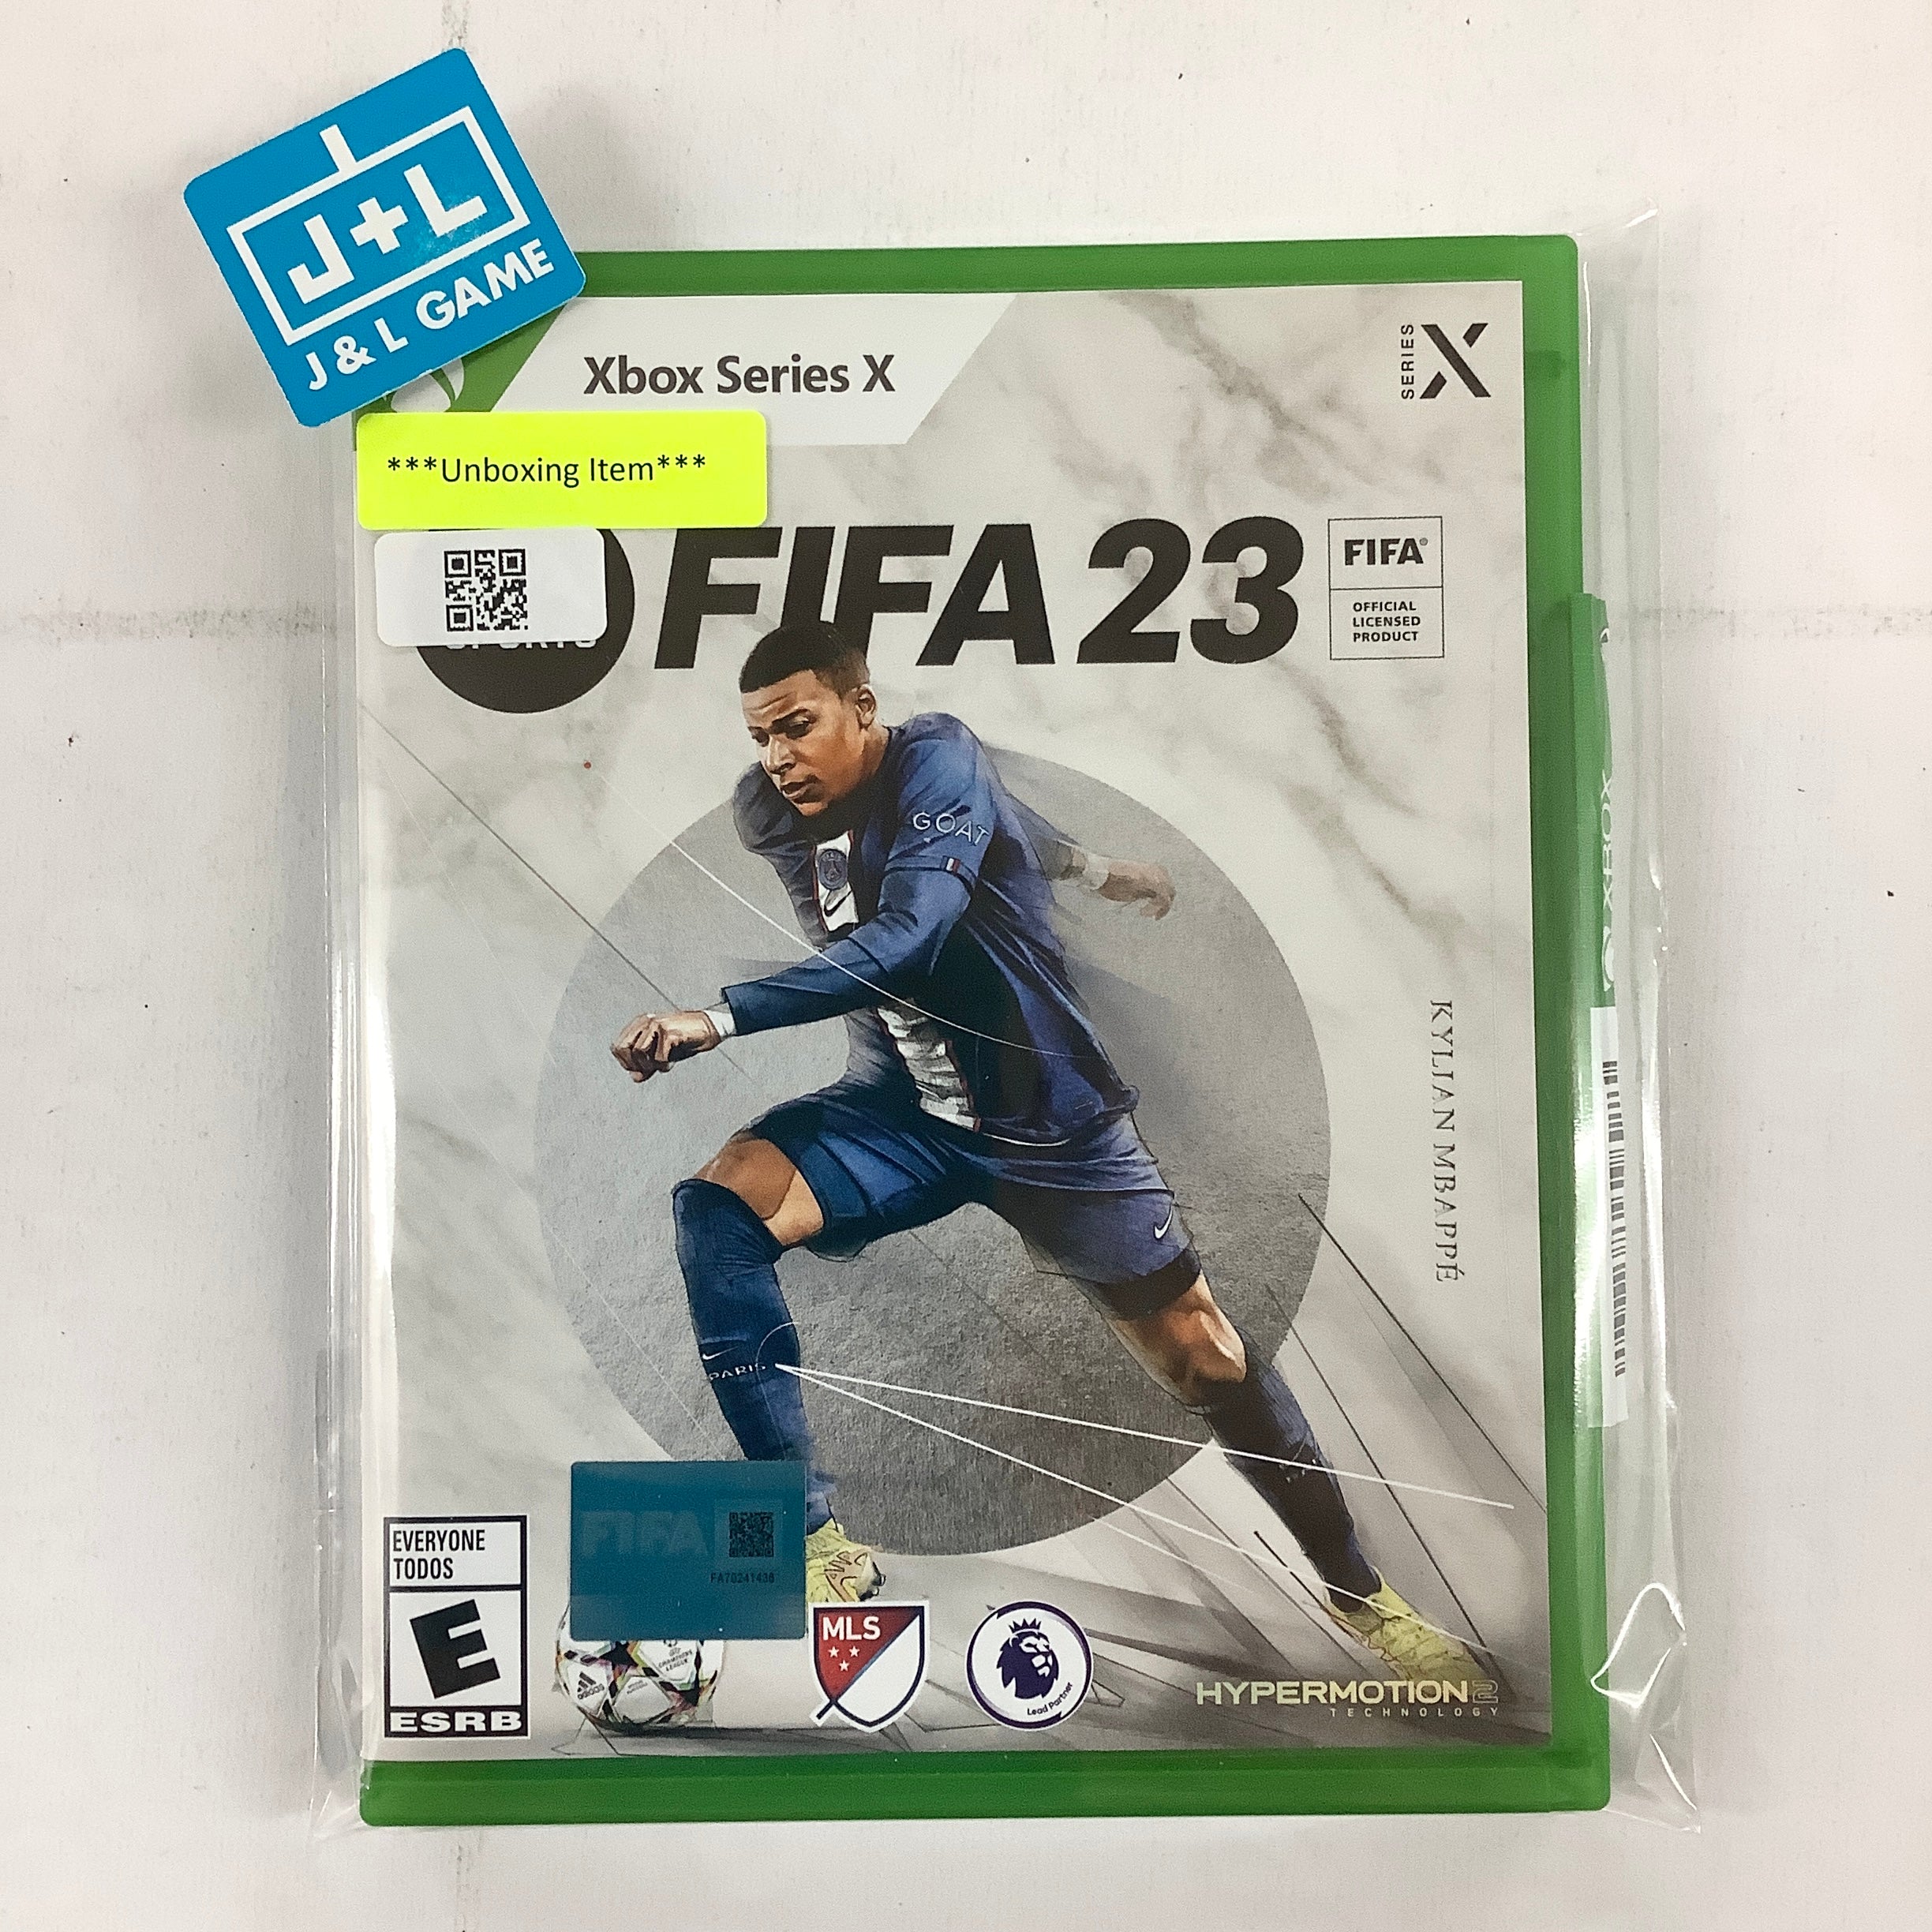 FIFA 23 - (XSX) Xbox Series X [UNBOXING] Video Games Electronic Arts   